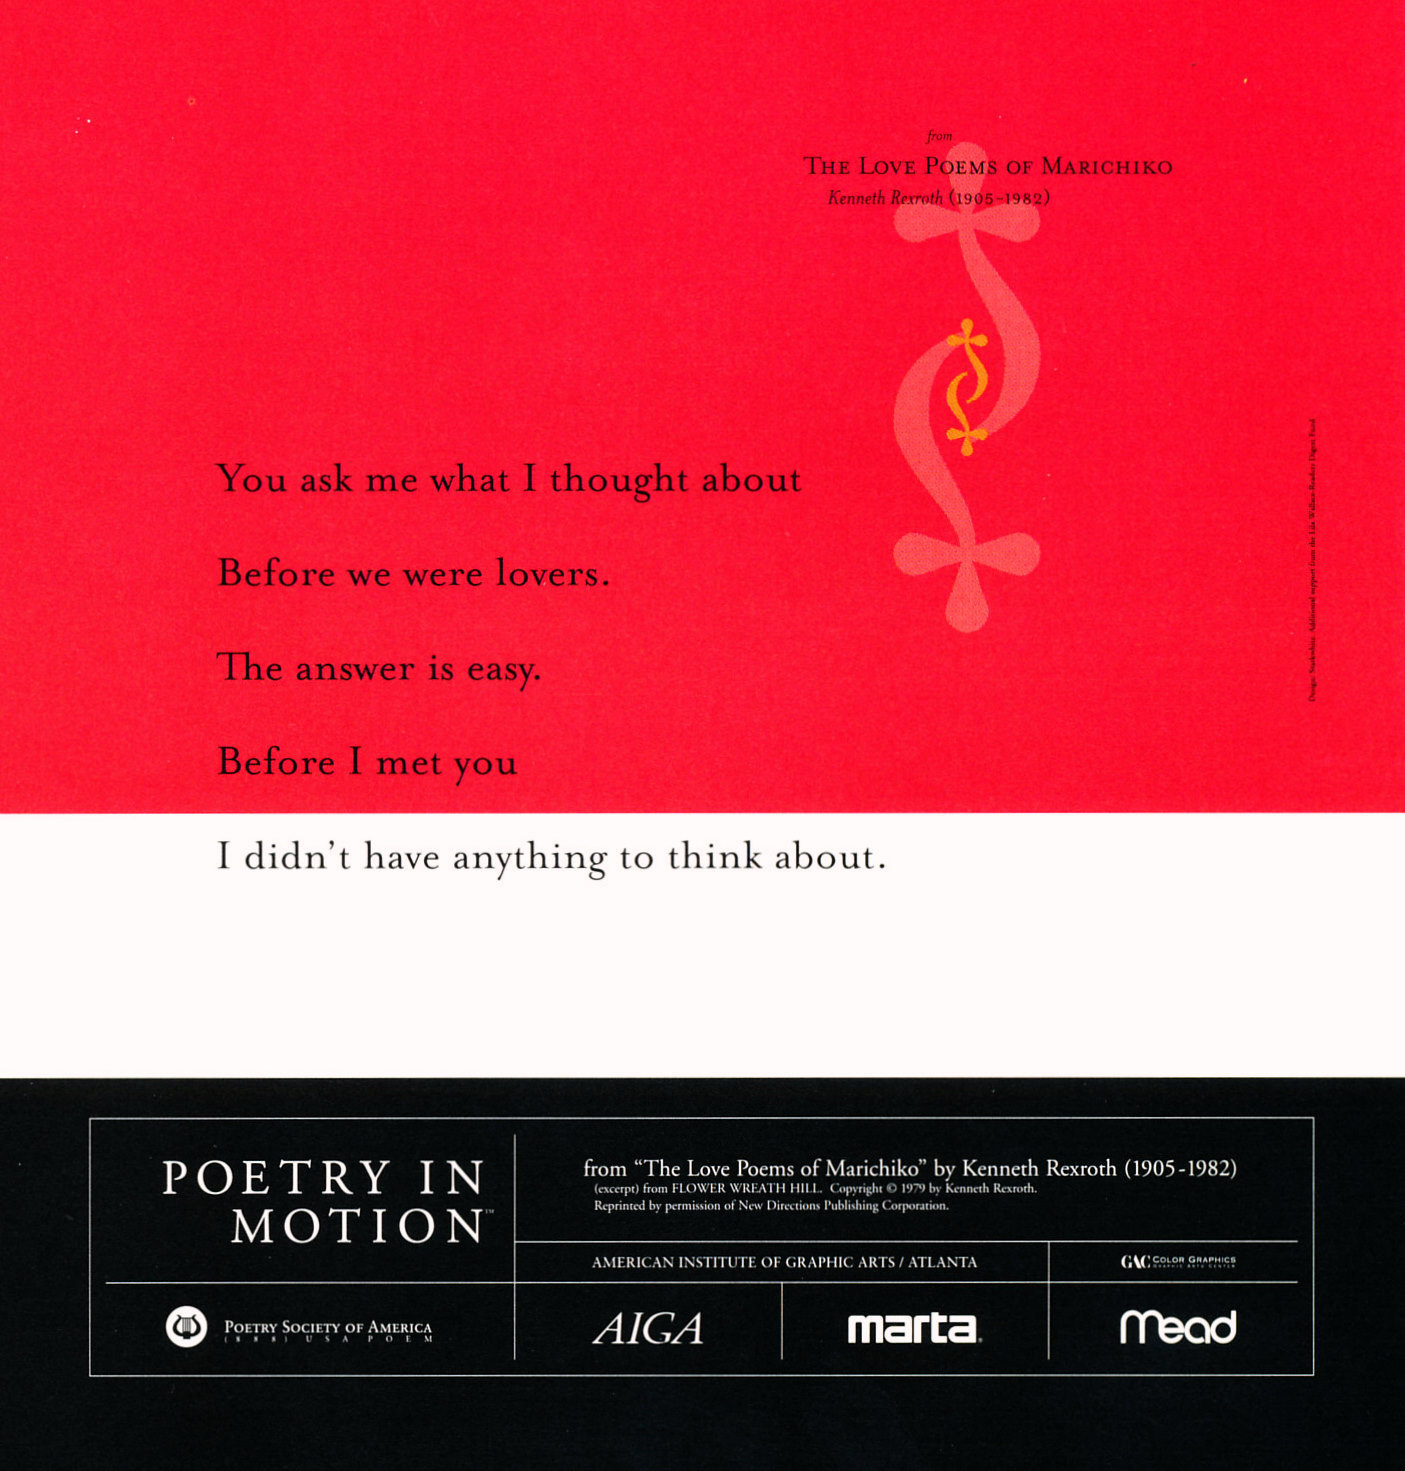 A vertical red poster features the poem The Love Poems of Marichiko by Kenneth Rexroth in black text.